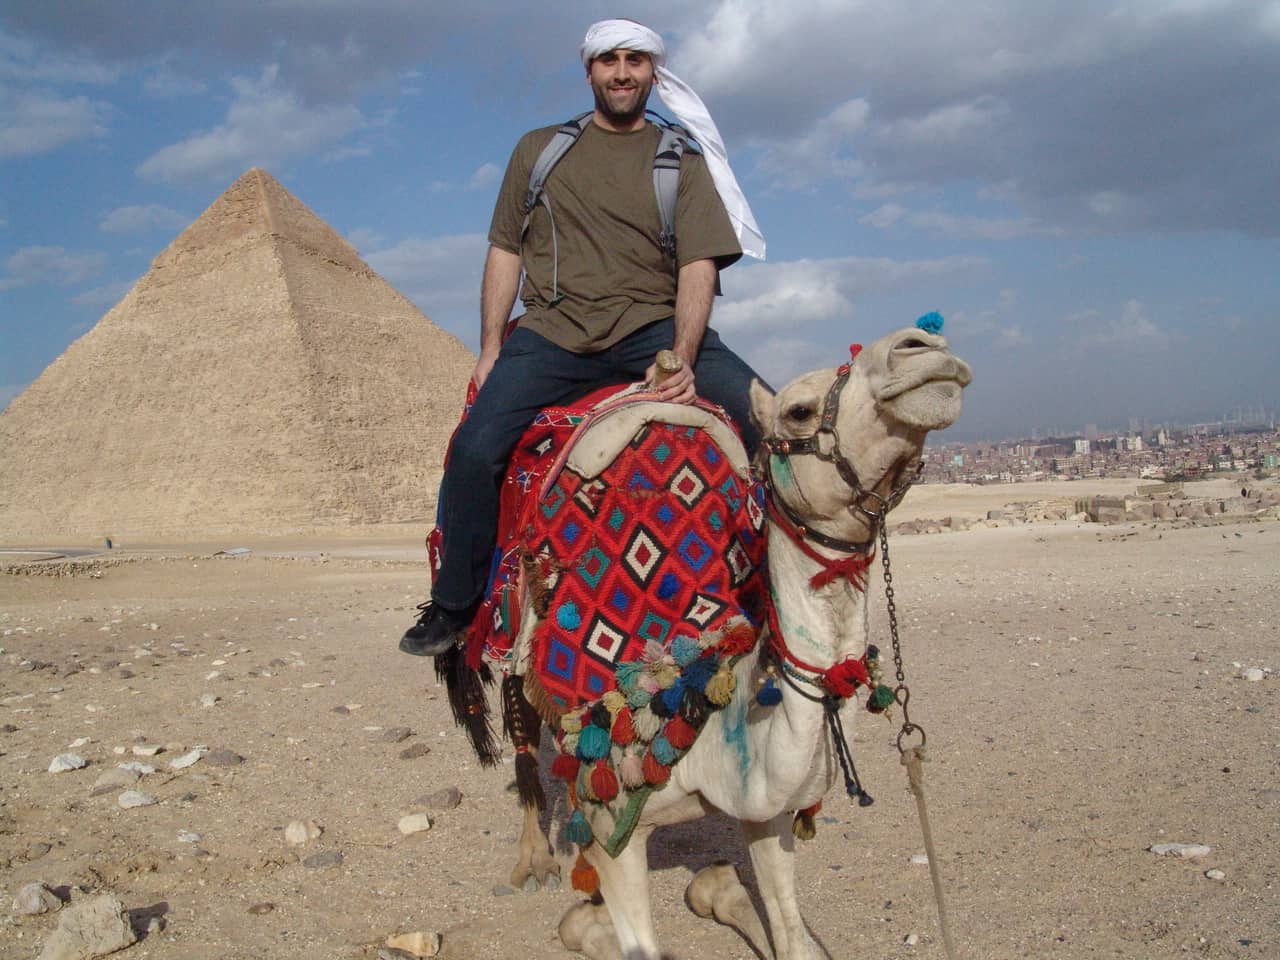 Me on a camel at the Pyramids of Giza in Egypt